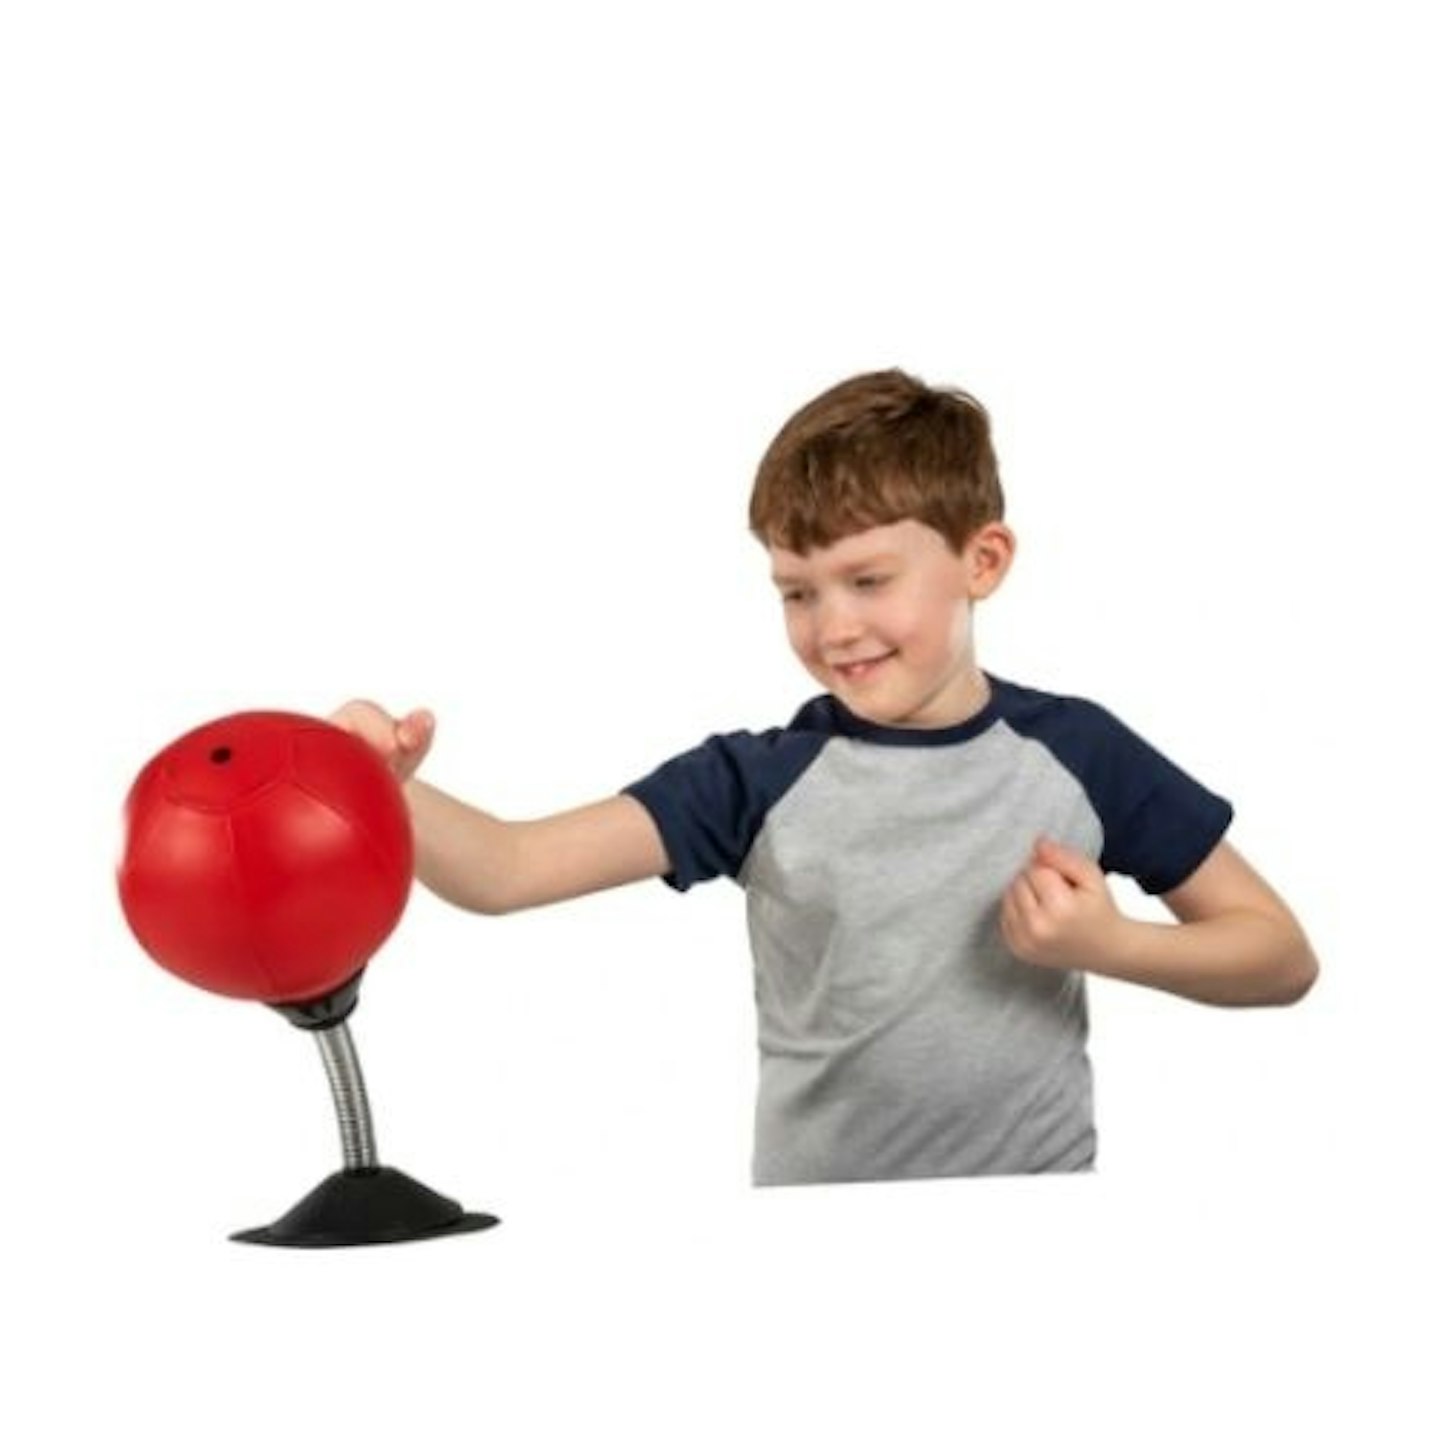 Tabletop Stress Buster Punching Ball